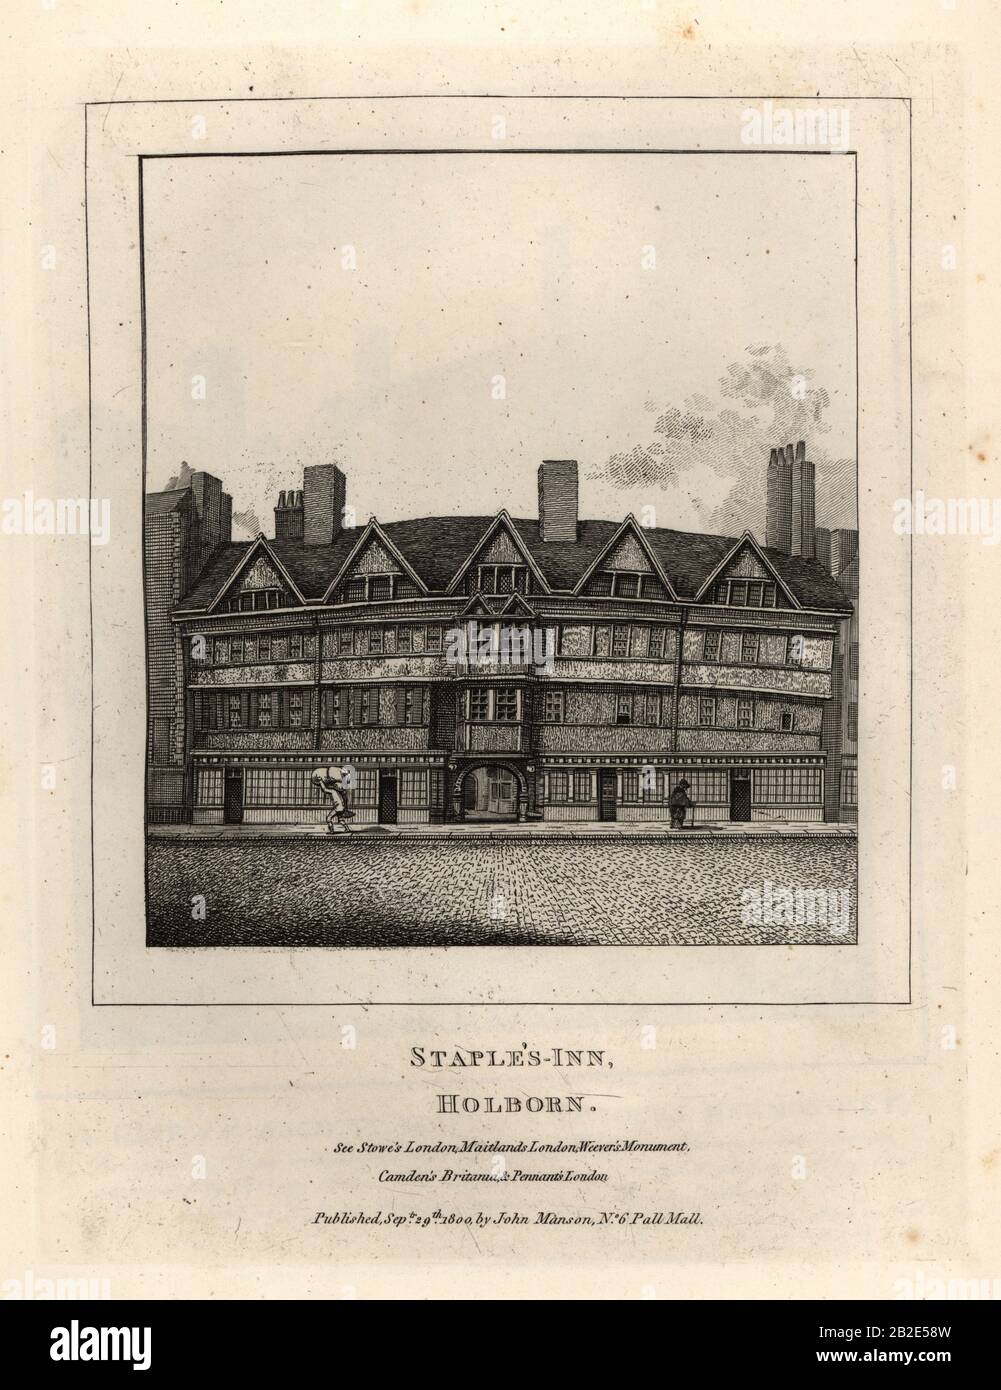 Staple’s Inn, Holborn. Tudor building originally attached to Gray’s Inn, one of four Inns of Court. Copperplate engraving by John Thomas Smith after original drawings by members of the Society of Antiquaries from his J.T. Smith’s Antiquities of London and its Environs, J. Sewell, R. Folder, J. Simco, London, 1800. Stock Photo